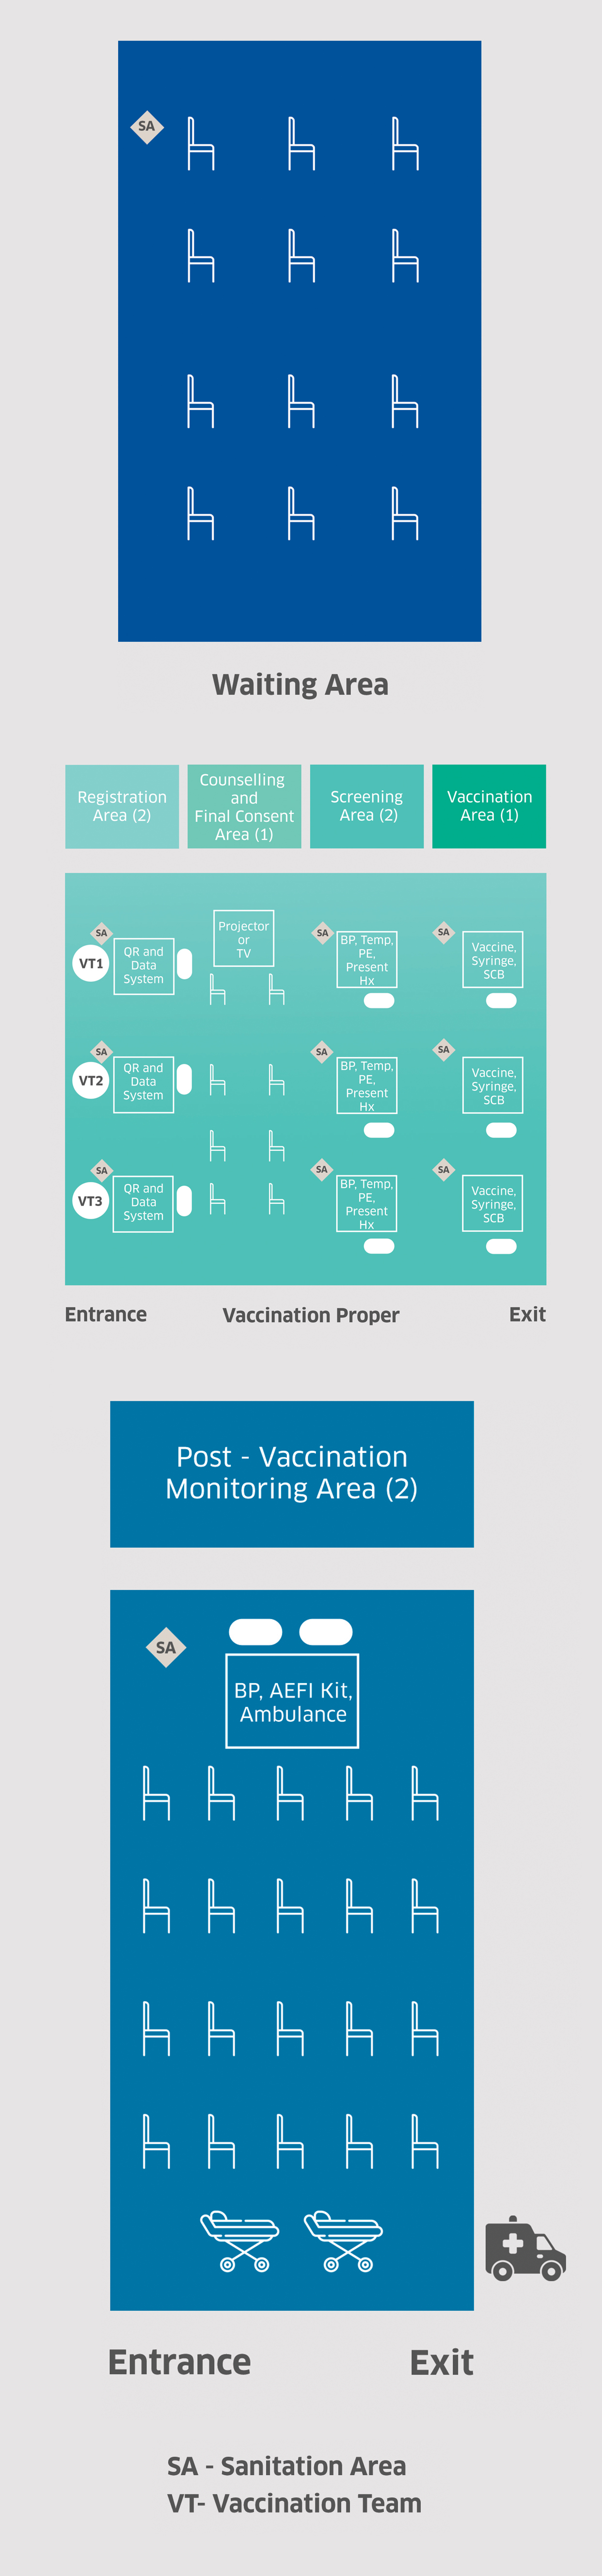 Vaccination Image 1 (Mobile)